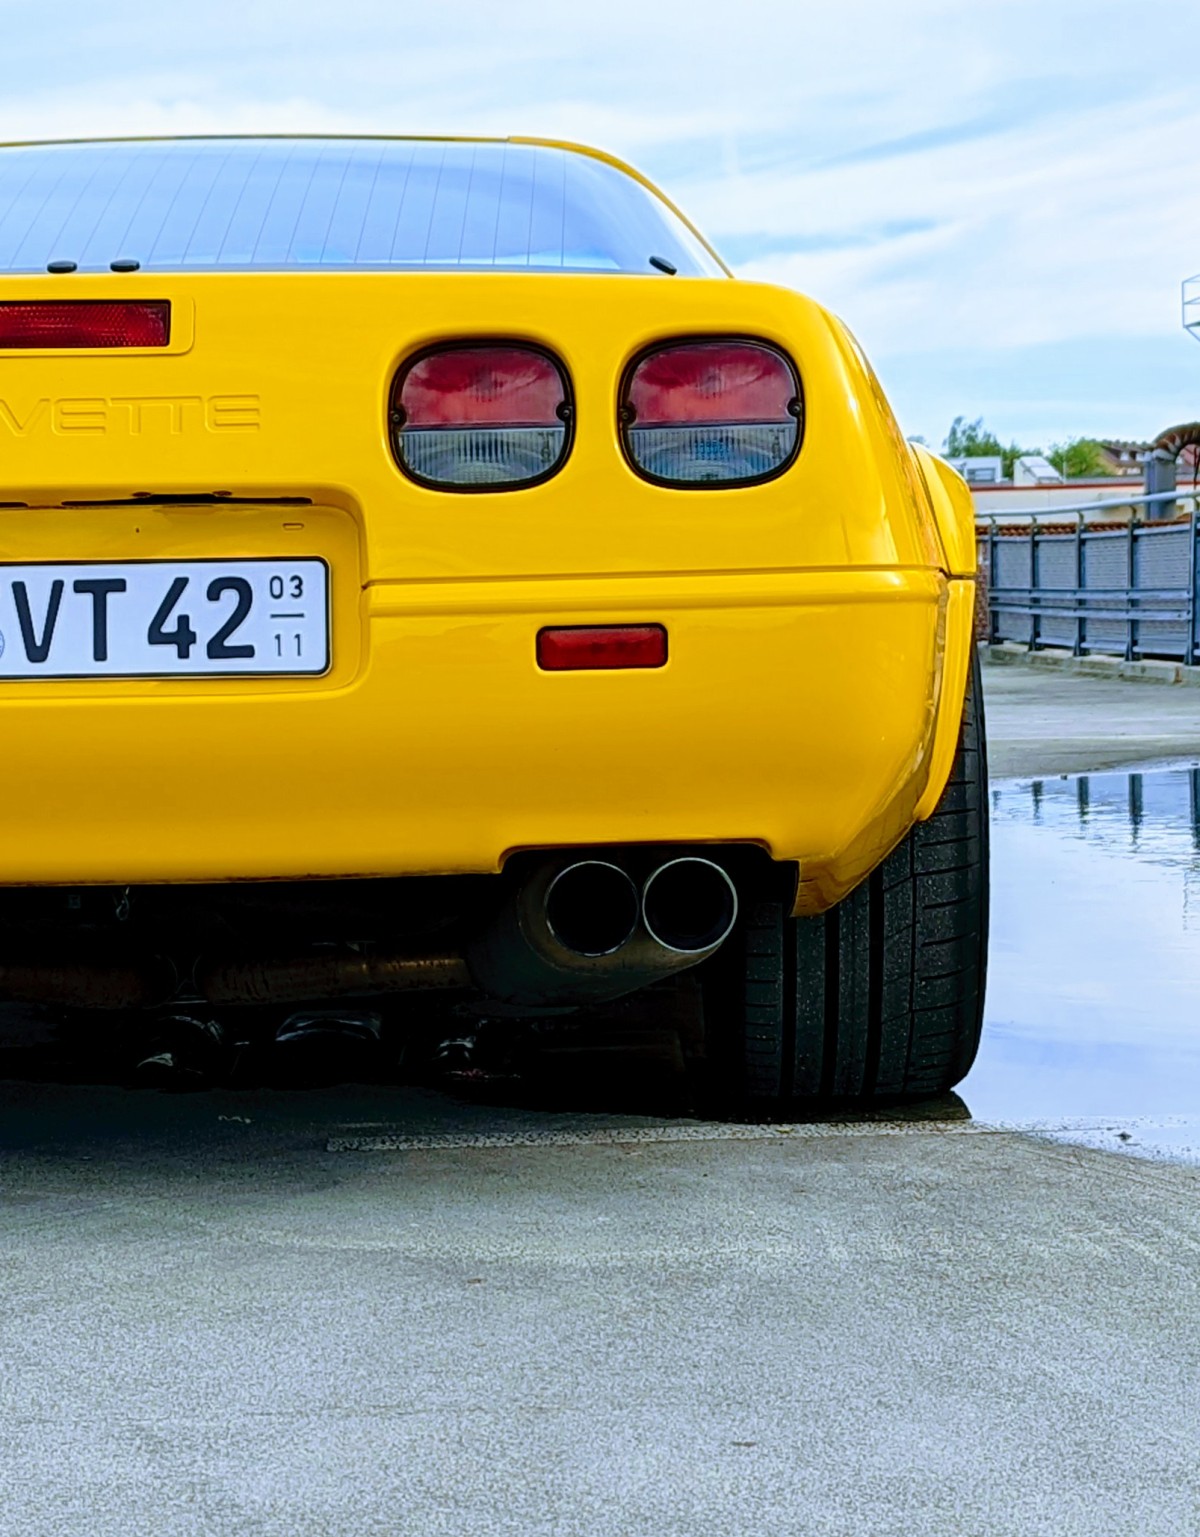 The answer to all questions #42 – always fun to drive. #Corvette #corvettec4 #vette #chevy #lt1 #1994 #fender #taillights #redwhite #yellow #youngtimer #corsaexhaust #extremecontactsport @corsaperformance @continental_tire